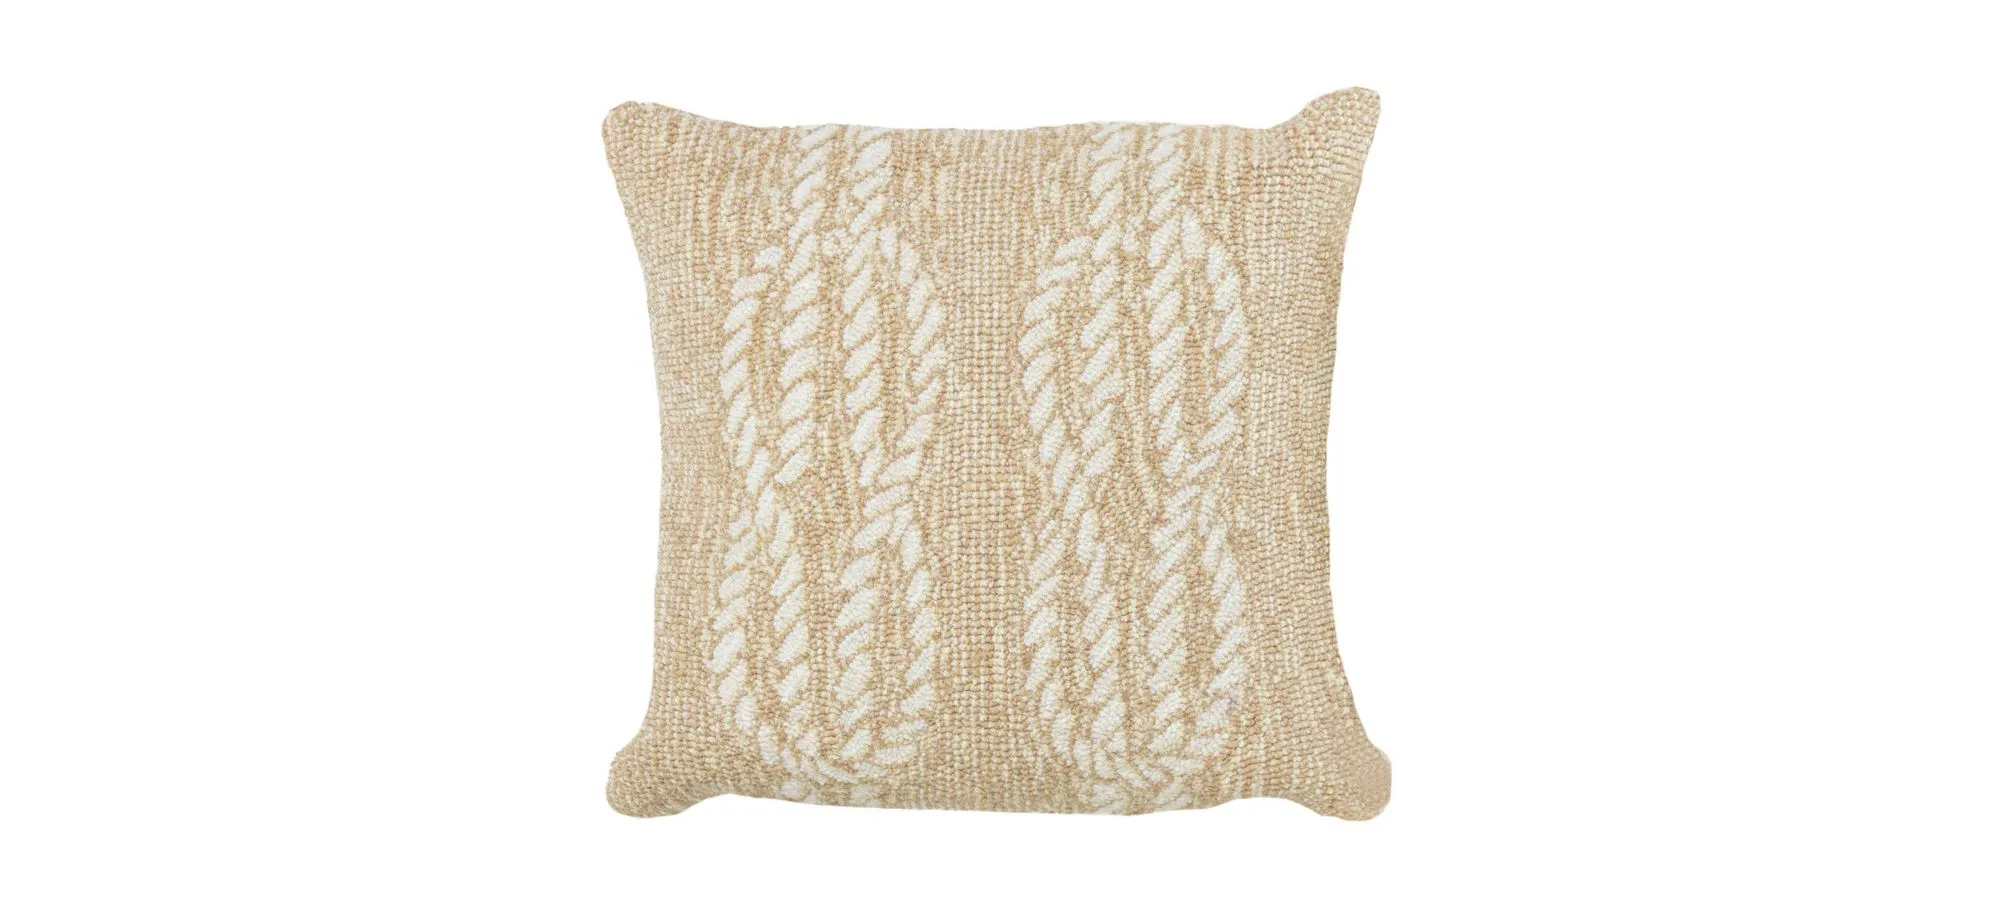 Liora Manne Frontporch Ropes Pillow in Natural by Trans-Ocean Import Co Inc